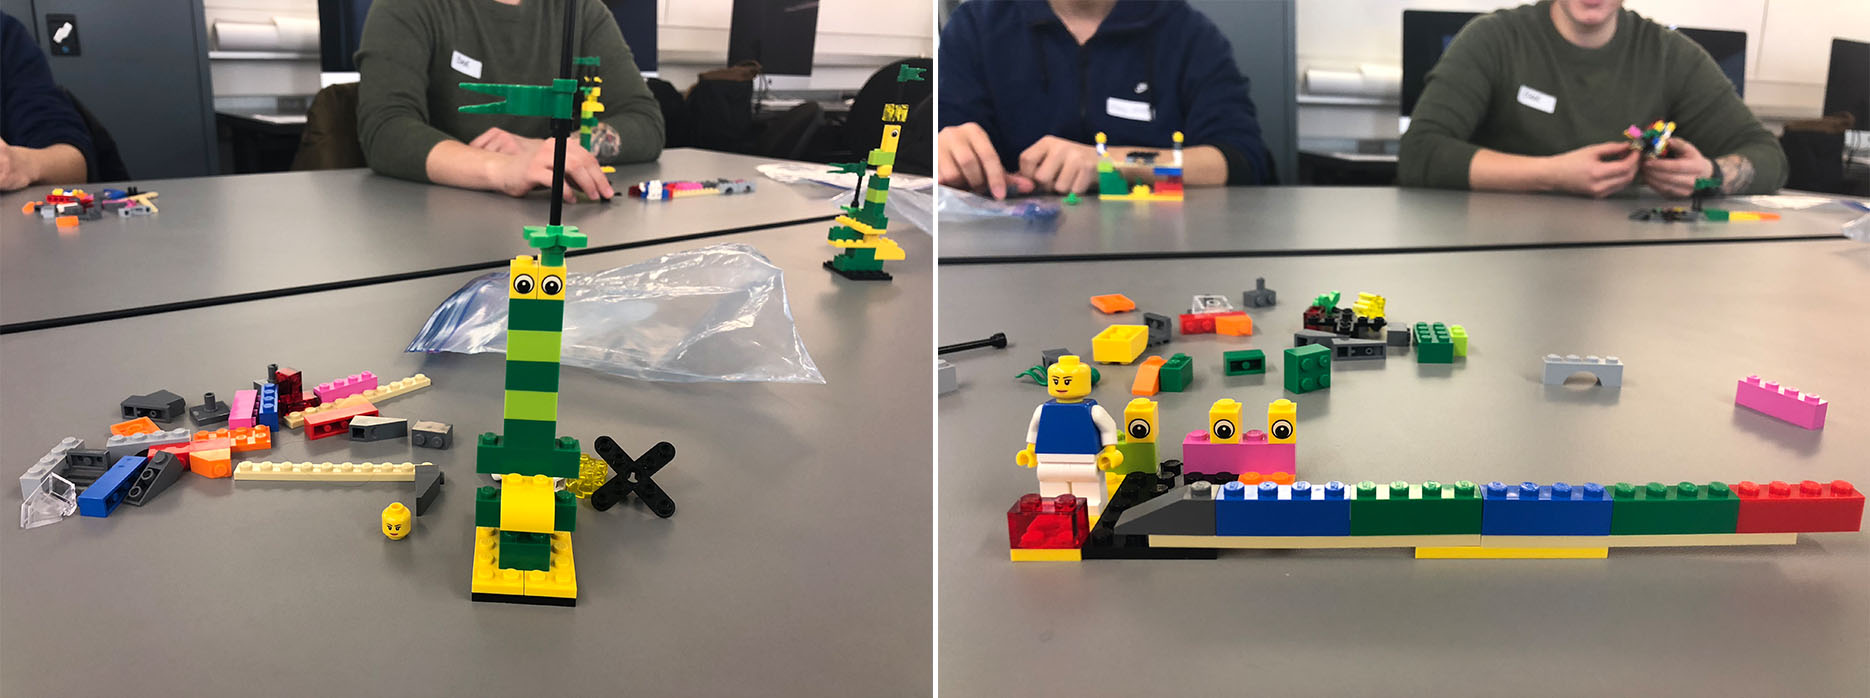 LEGO Serious Play in class